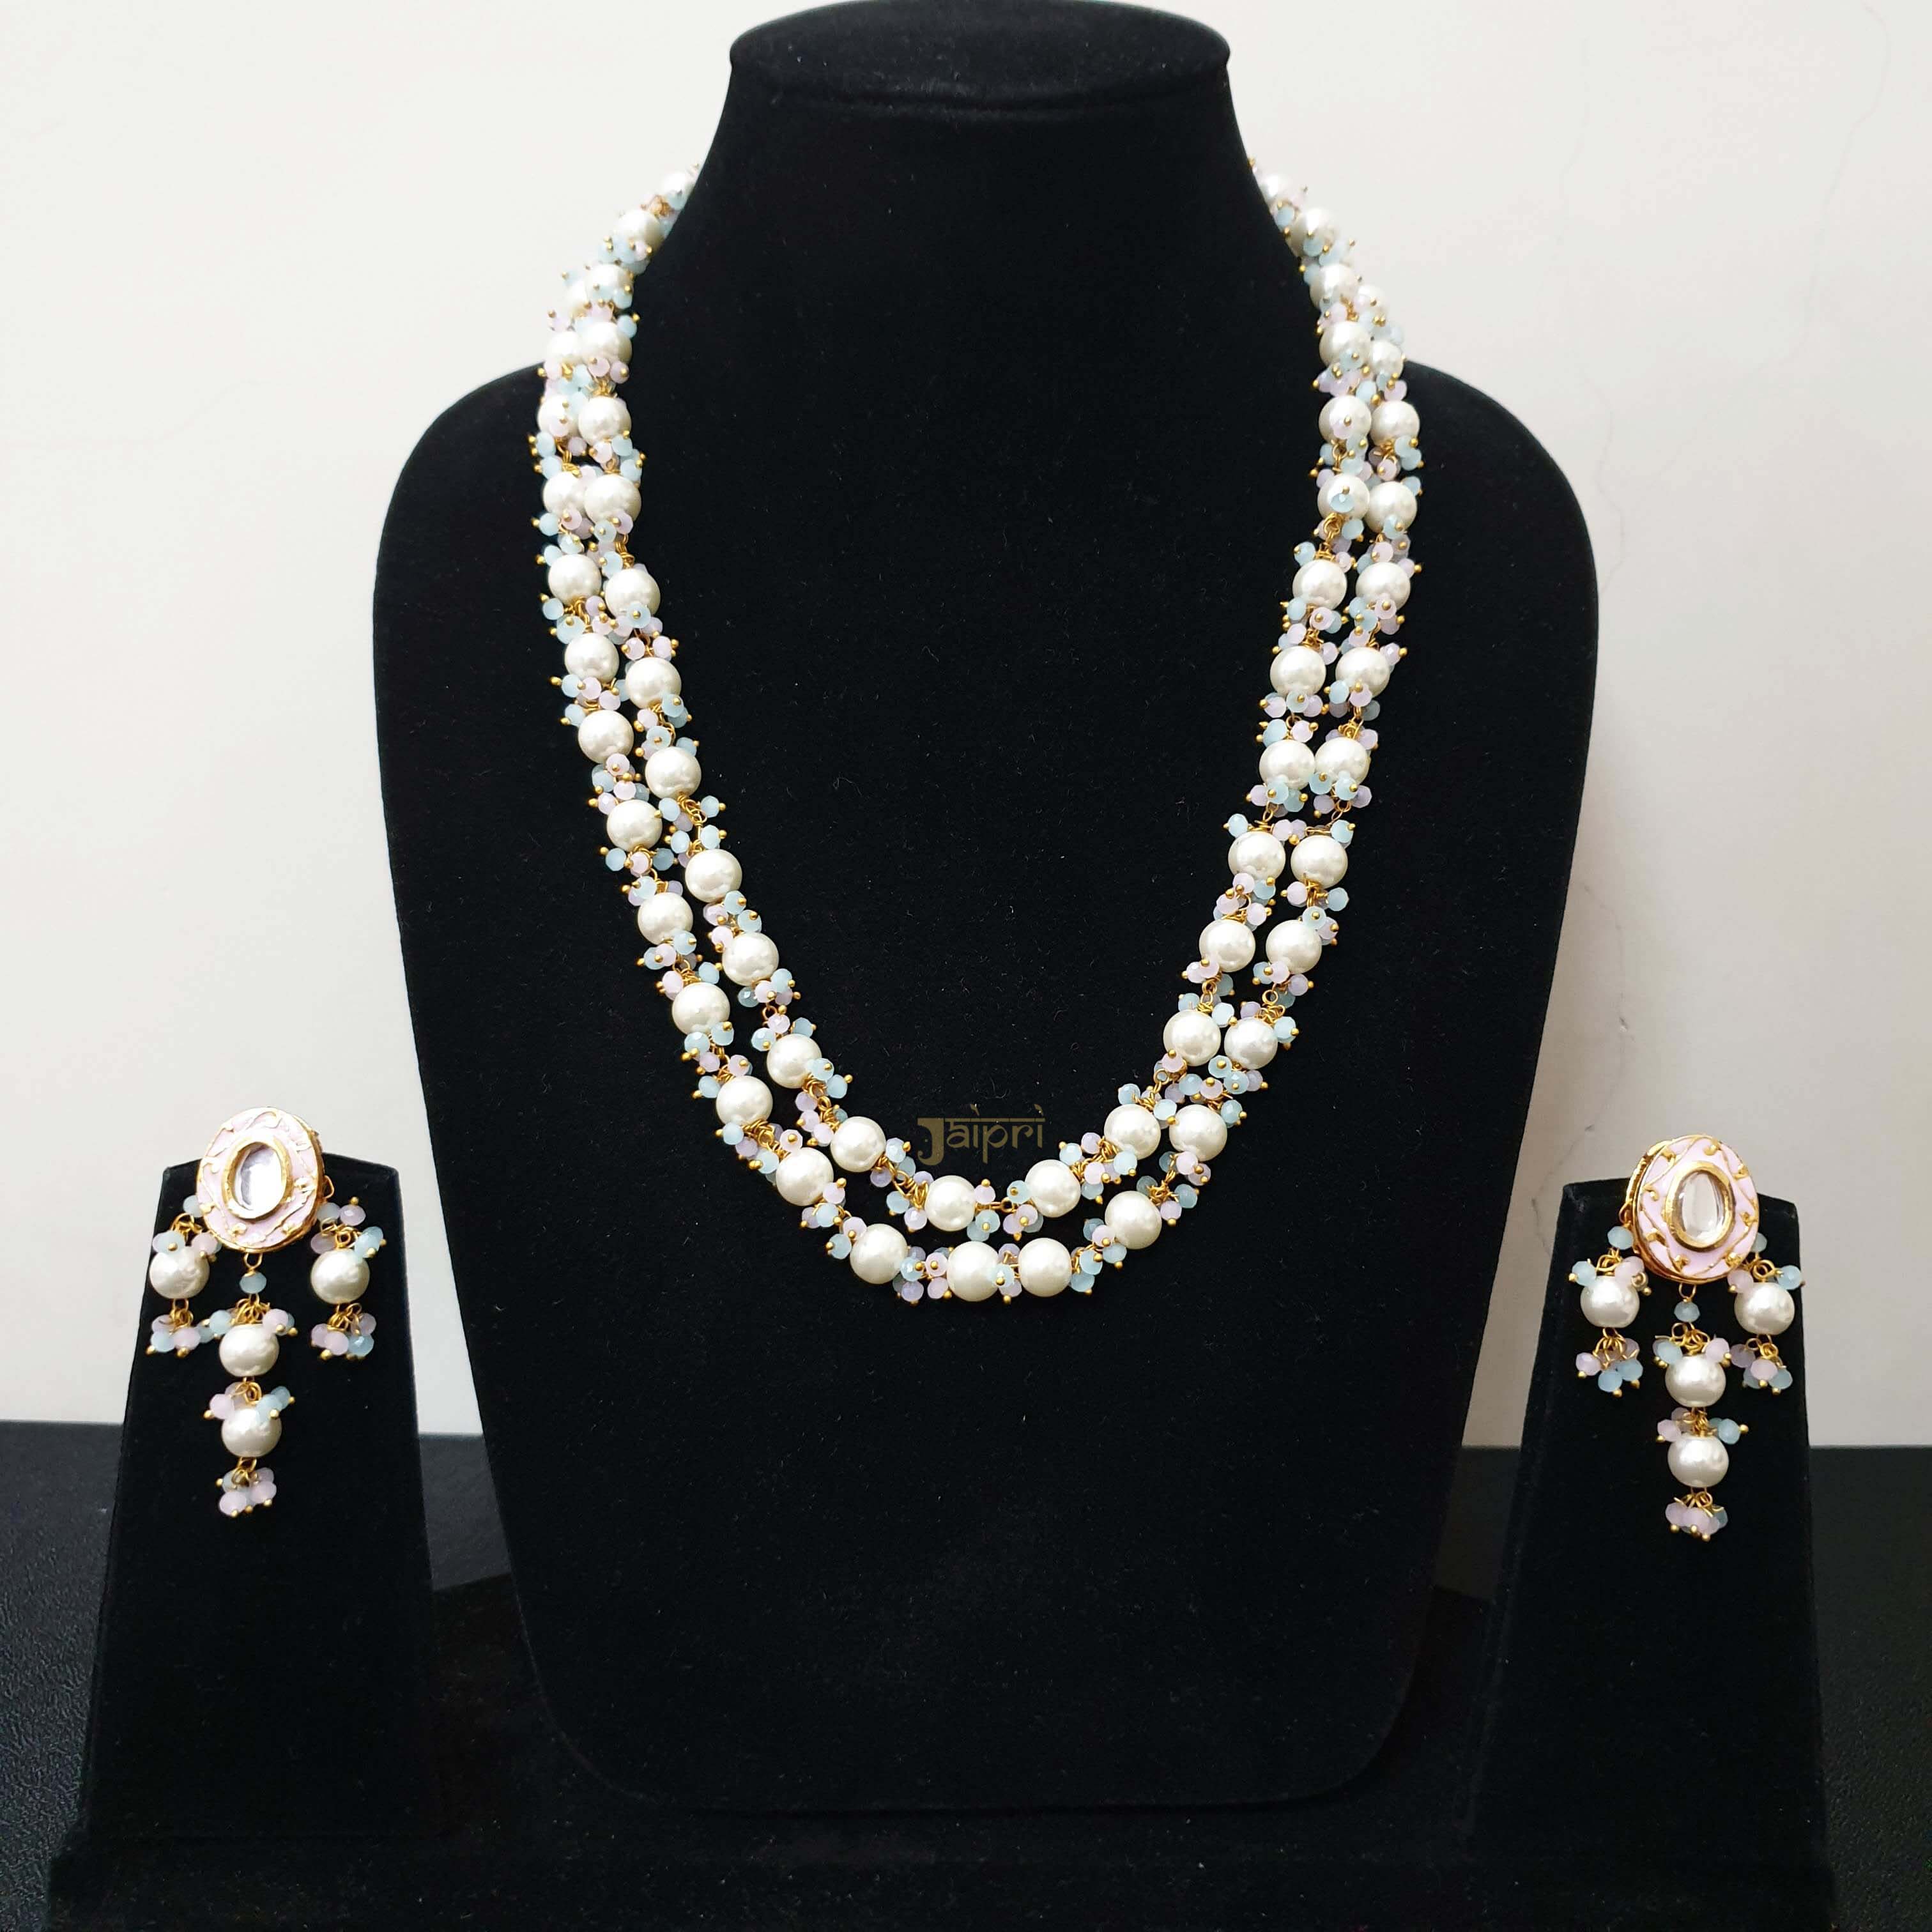 Premium Pearl And Turquoise Beads Necklace With Earrings